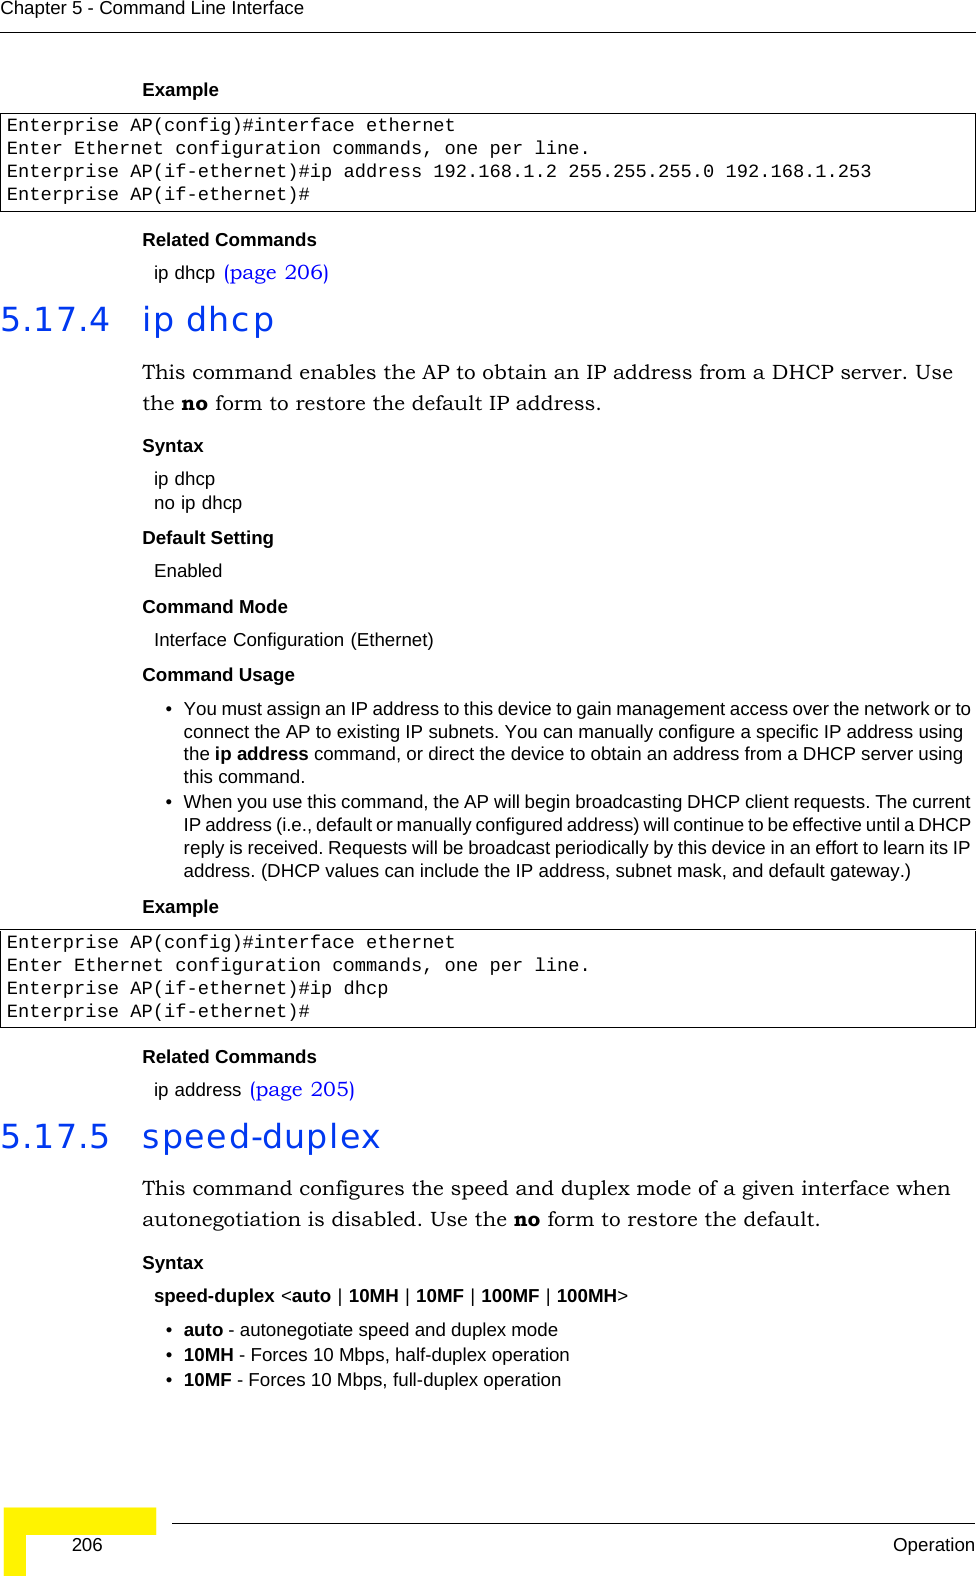  206 OperationChapter 5 - Command Line InterfaceExampleRelated Commandsip dhcp (page 206)5.17.4 ip dhcp This command enables the AP to obtain an IP address from a DHCP server. Use the no form to restore the default IP address.Syntax ip dhcpno ip dhcpDefault Setting EnabledCommand Mode Interface Configuration (Ethernet)Command Usage • You must assign an IP address to this device to gain management access over the network or to connect the AP to existing IP subnets. You can manually configure a specific IP address using the ip address command, or direct the device to obtain an address from a DHCP server using this command. • When you use this command, the AP will begin broadcasting DHCP client requests. The current IP address (i.e., default or manually configured address) will continue to be effective until a DHCP reply is received. Requests will be broadcast periodically by this device in an effort to learn its IP address. (DHCP values can include the IP address, subnet mask, and default gateway.) ExampleRelated Commandsip address (page 205)5.17.5 speed-duplexThis command configures the speed and duplex mode of a given interface when autonegotiation is disabled. Use the no form to restore the default.Syntax speed-duplex &lt;auto | 10MH | 10MF | 100MF | 100MH&gt;•auto - autonegotiate speed and duplex mode•10MH - Forces 10 Mbps, half-duplex operation•10MF - Forces 10 Mbps, full-duplex operation Enterprise AP(config)#interface ethernetEnter Ethernet configuration commands, one per line.Enterprise AP(if-ethernet)#ip address 192.168.1.2 255.255.255.0 192.168.1.253Enterprise AP(if-ethernet)#Enterprise AP(config)#interface ethernetEnter Ethernet configuration commands, one per line.Enterprise AP(if-ethernet)#ip dhcpEnterprise AP(if-ethernet)#